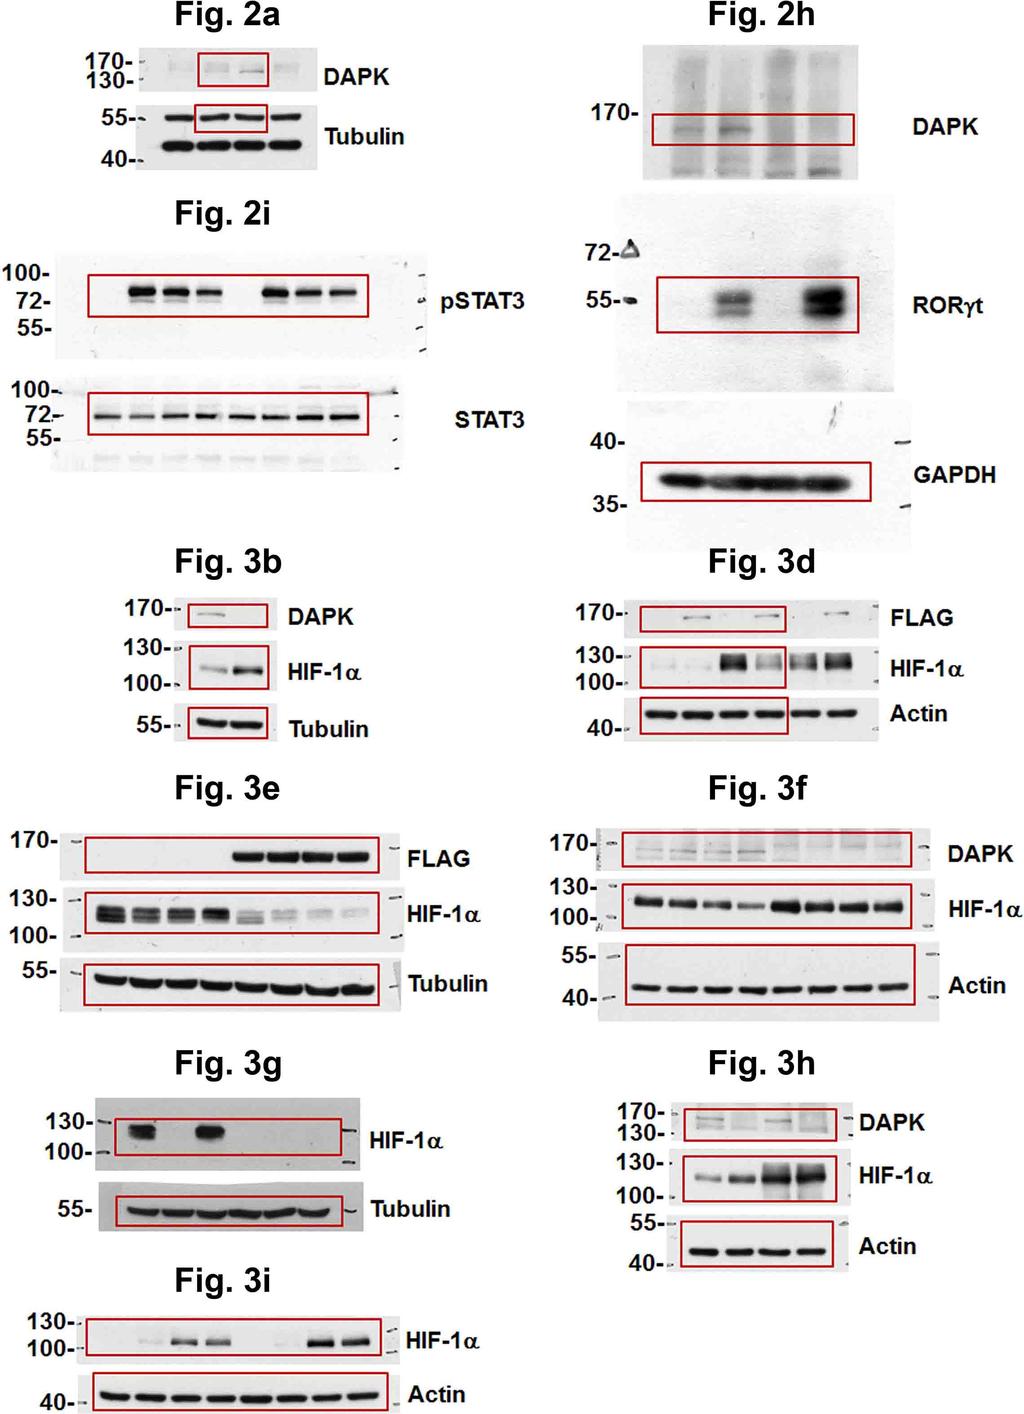 Supplementary Figure 12. Uncropped images of the original scans of immunoblots.